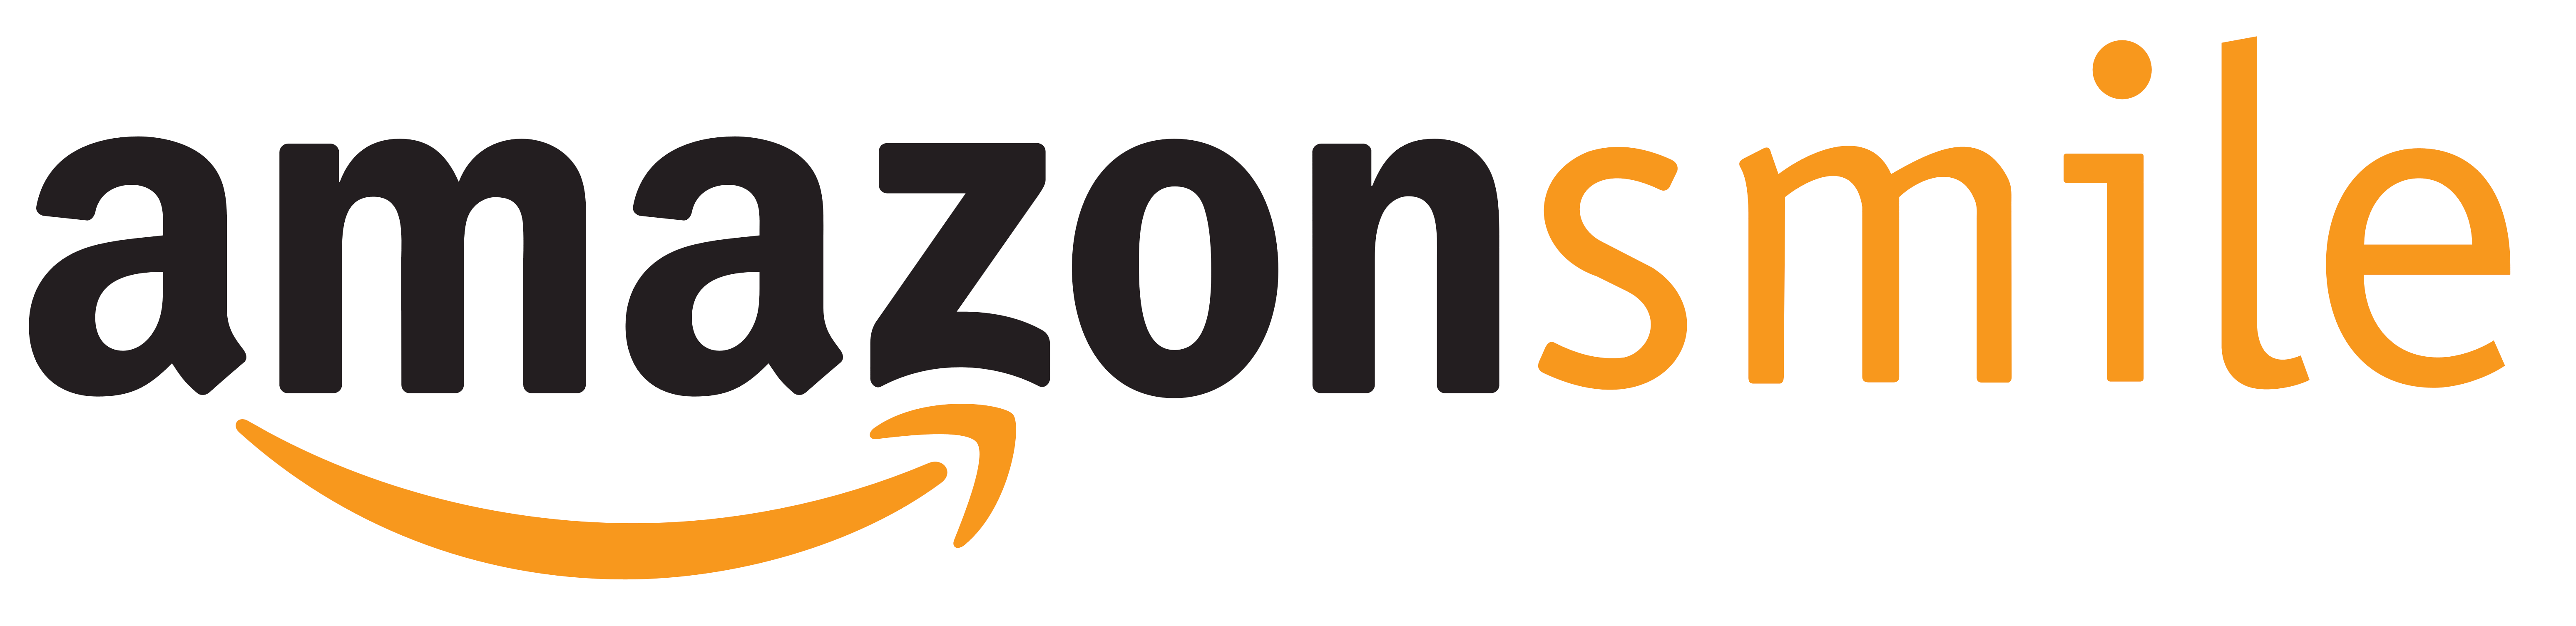 Support the community foundation when you shop on Amazon Smile